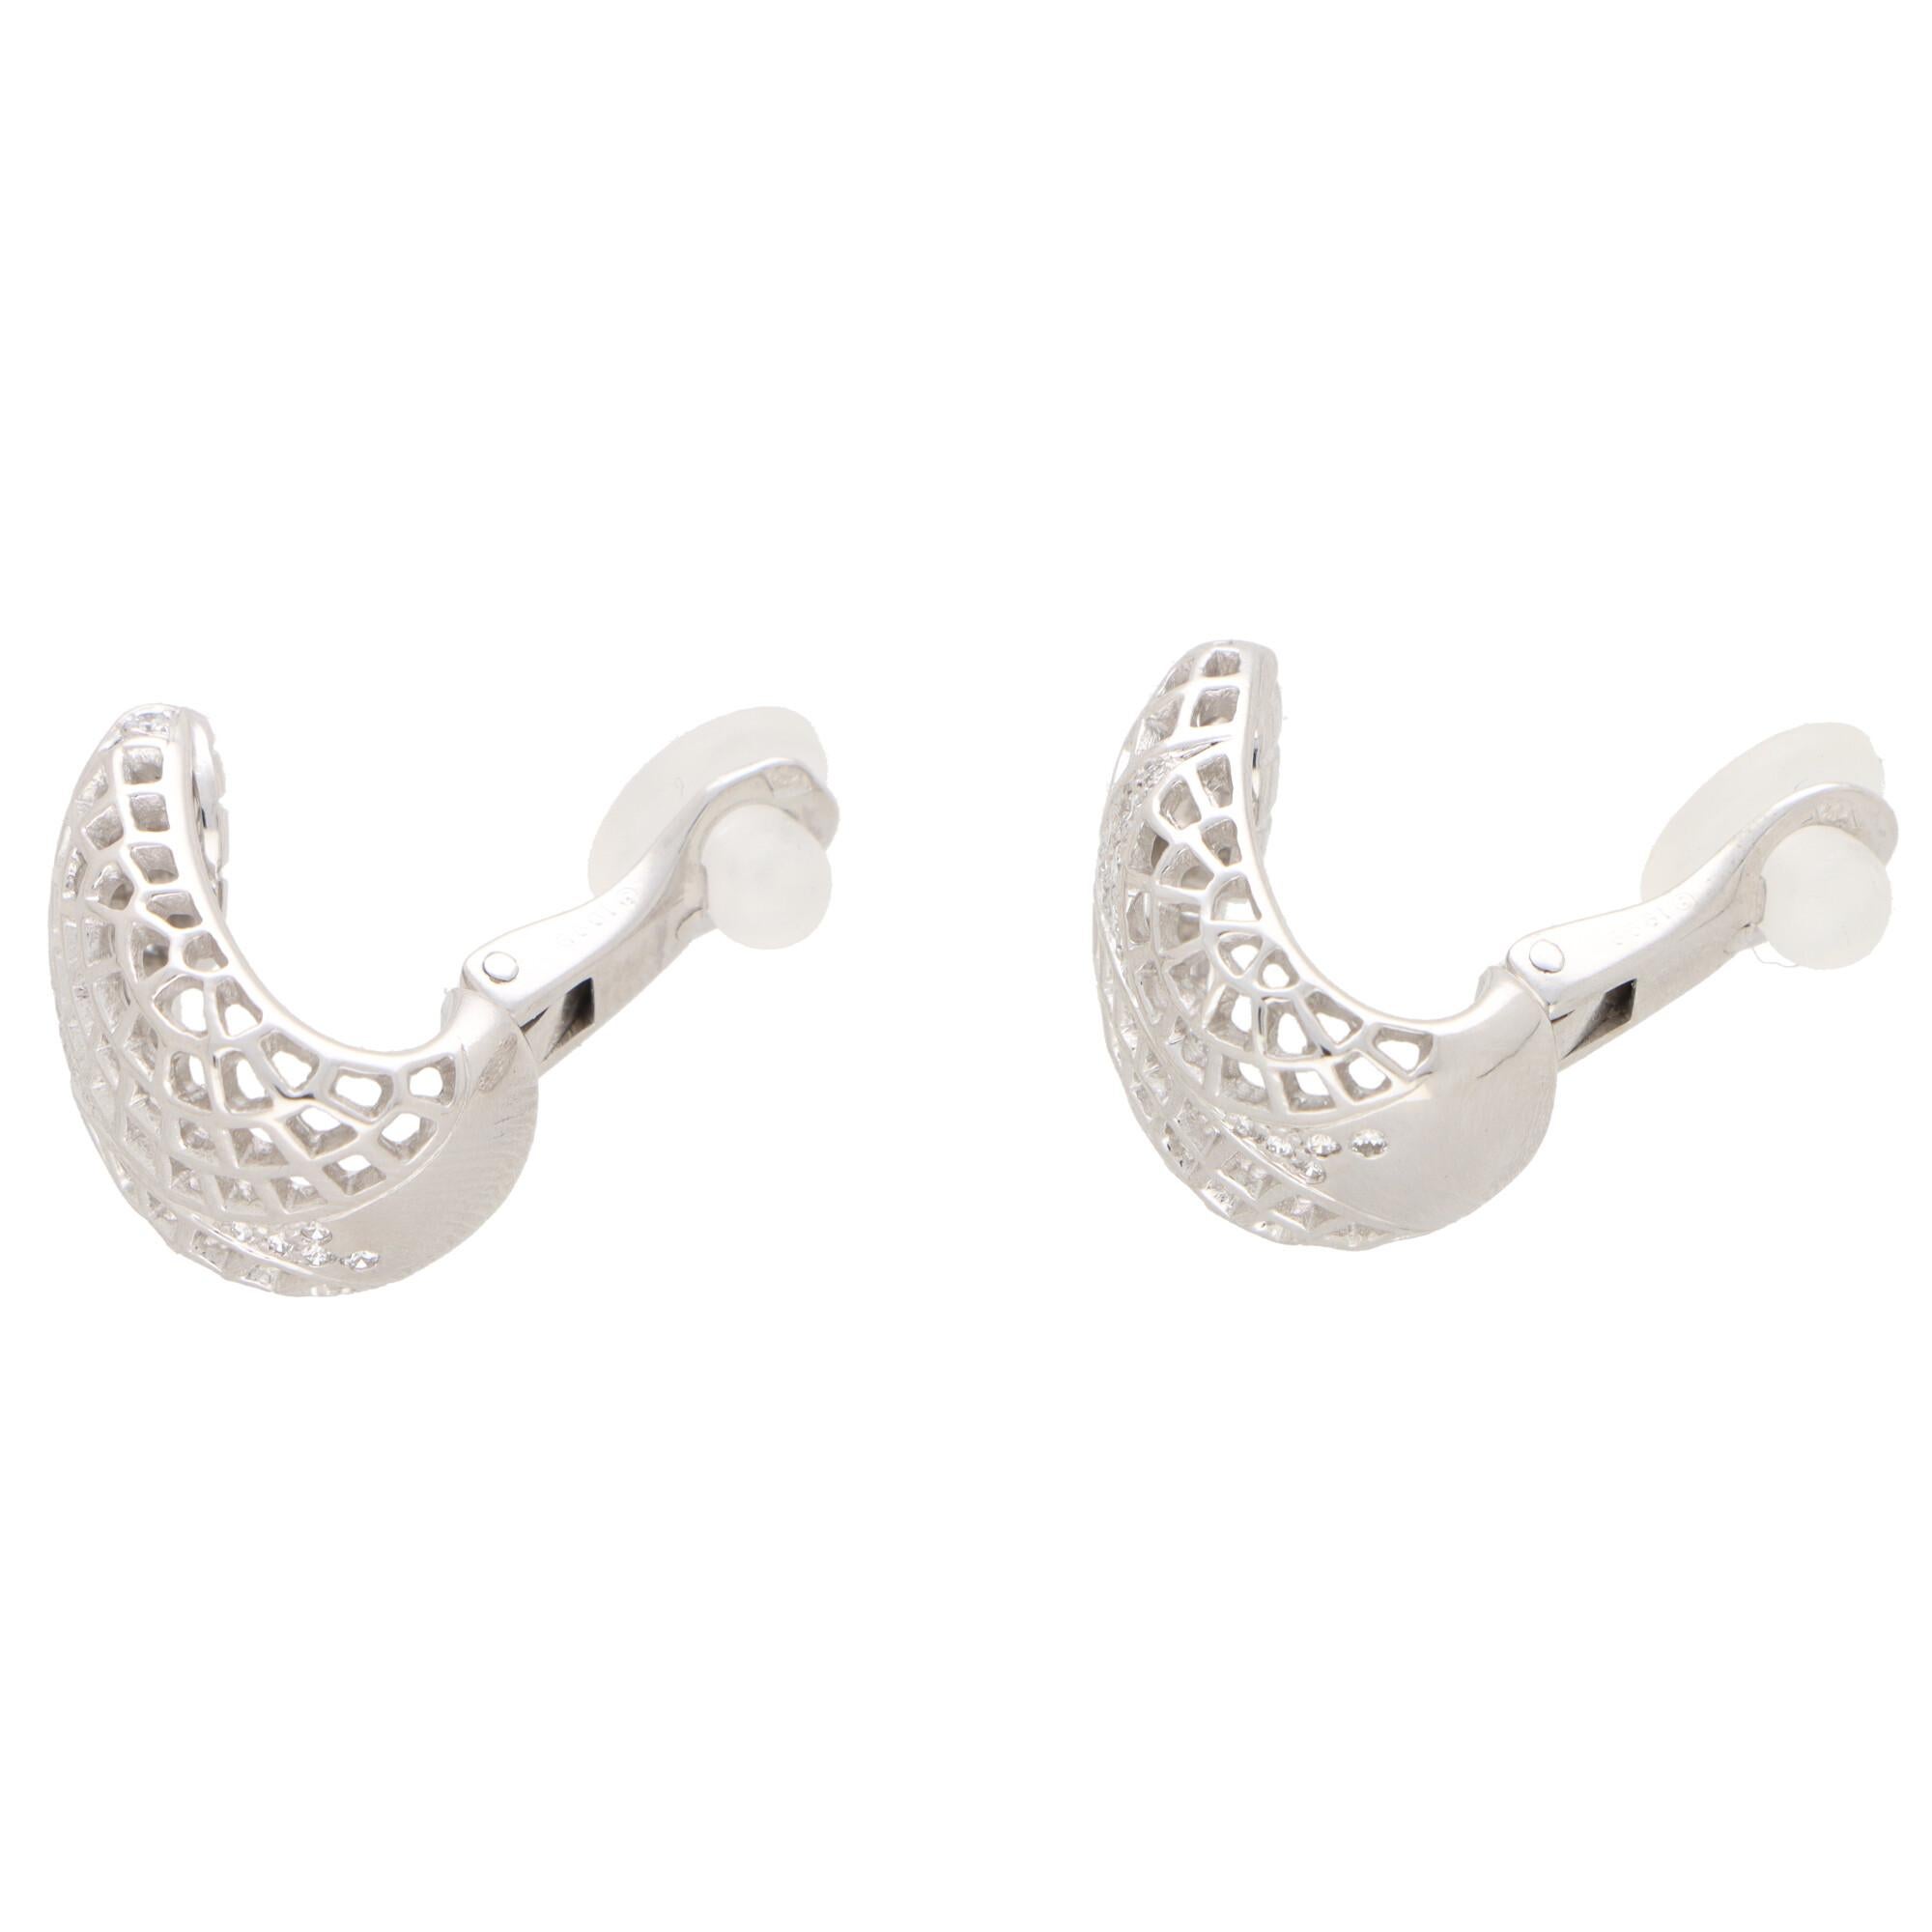  A beautiful pair of vintage of Cartier Nouvelle Vague earrings set in 18k white gold.

From the now discontinued Nouvelle Vague collection, the earrings are each composed of a geometric webbed design. Each earring is set with nine round brilliant